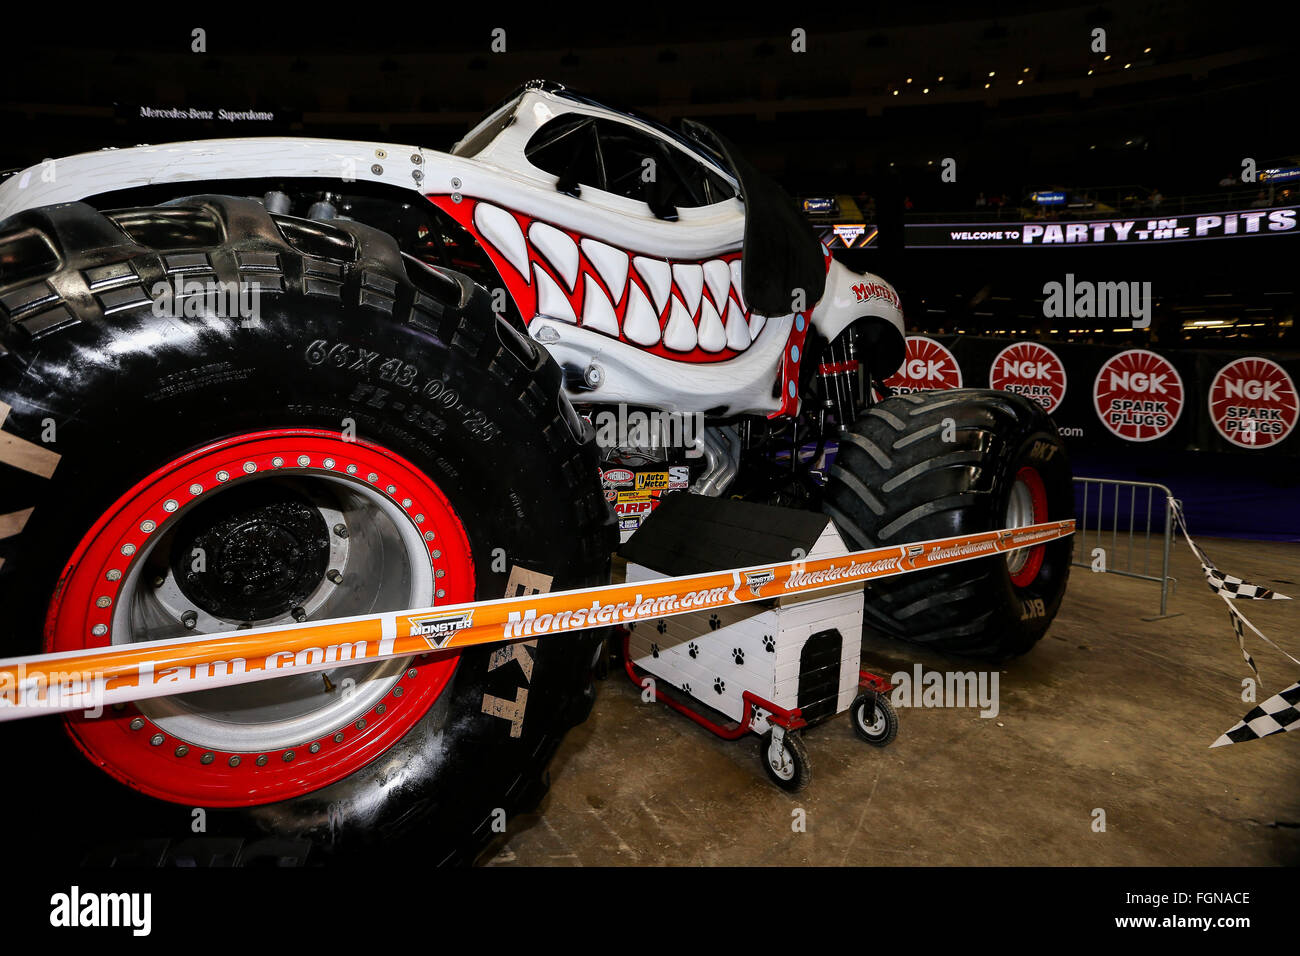 New Orleans, LA, USA. 20th Feb, 2016. Monster Mutt monster truck in action during Monster Jam at the Mercedes-Benz Superdome in New Orleans, LA. Stephen Lew/CSM/Alamy Live News Stock Photo